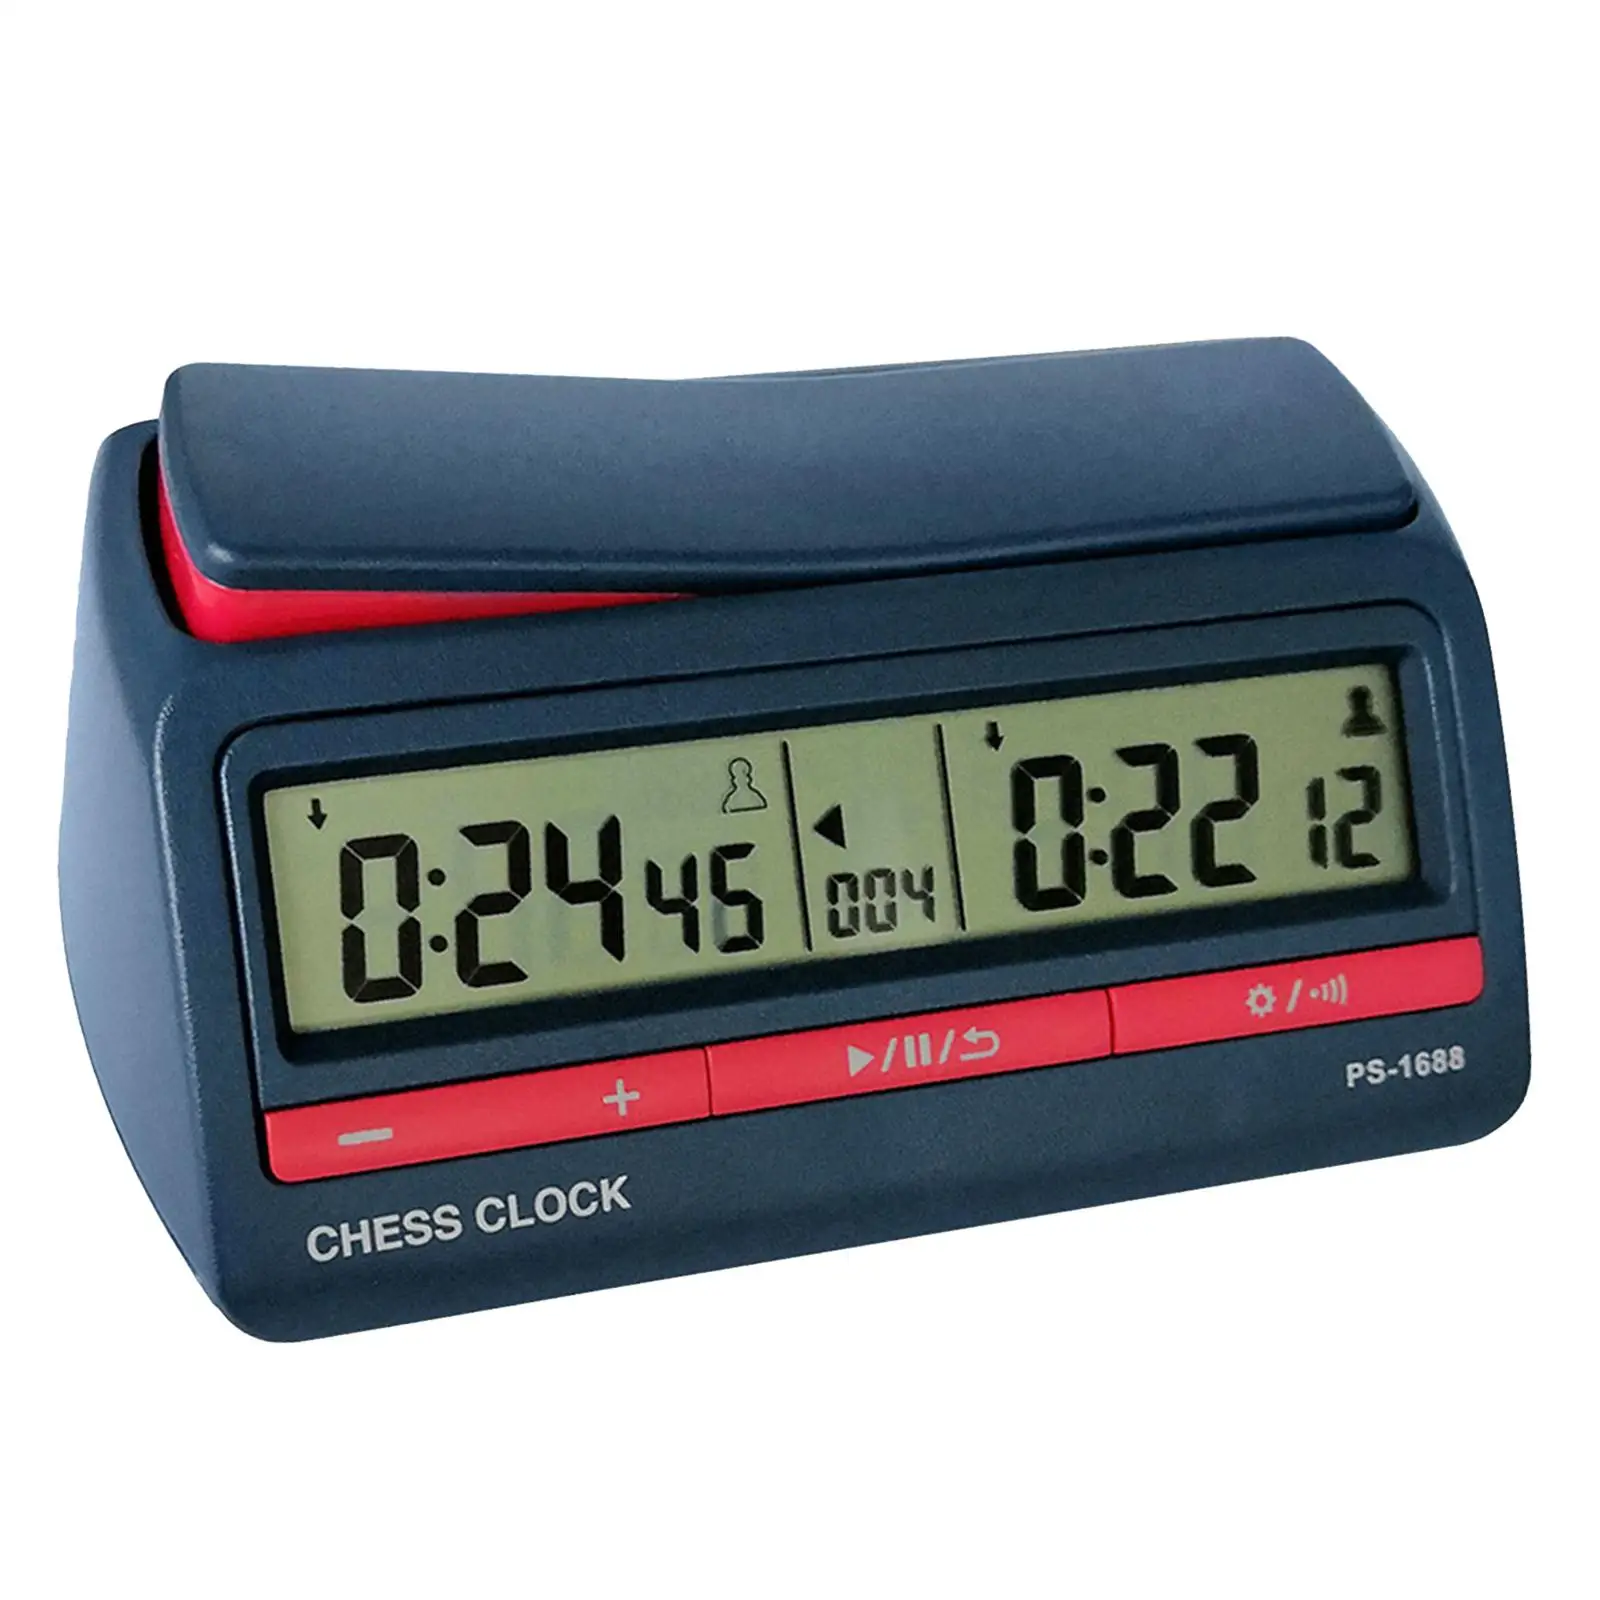 

Digital Chess Timer,Chess Clock,Digital Timer,Add Seconds Function,Advanced Digital Chess Timer,Chess Clock for Chinese Chess